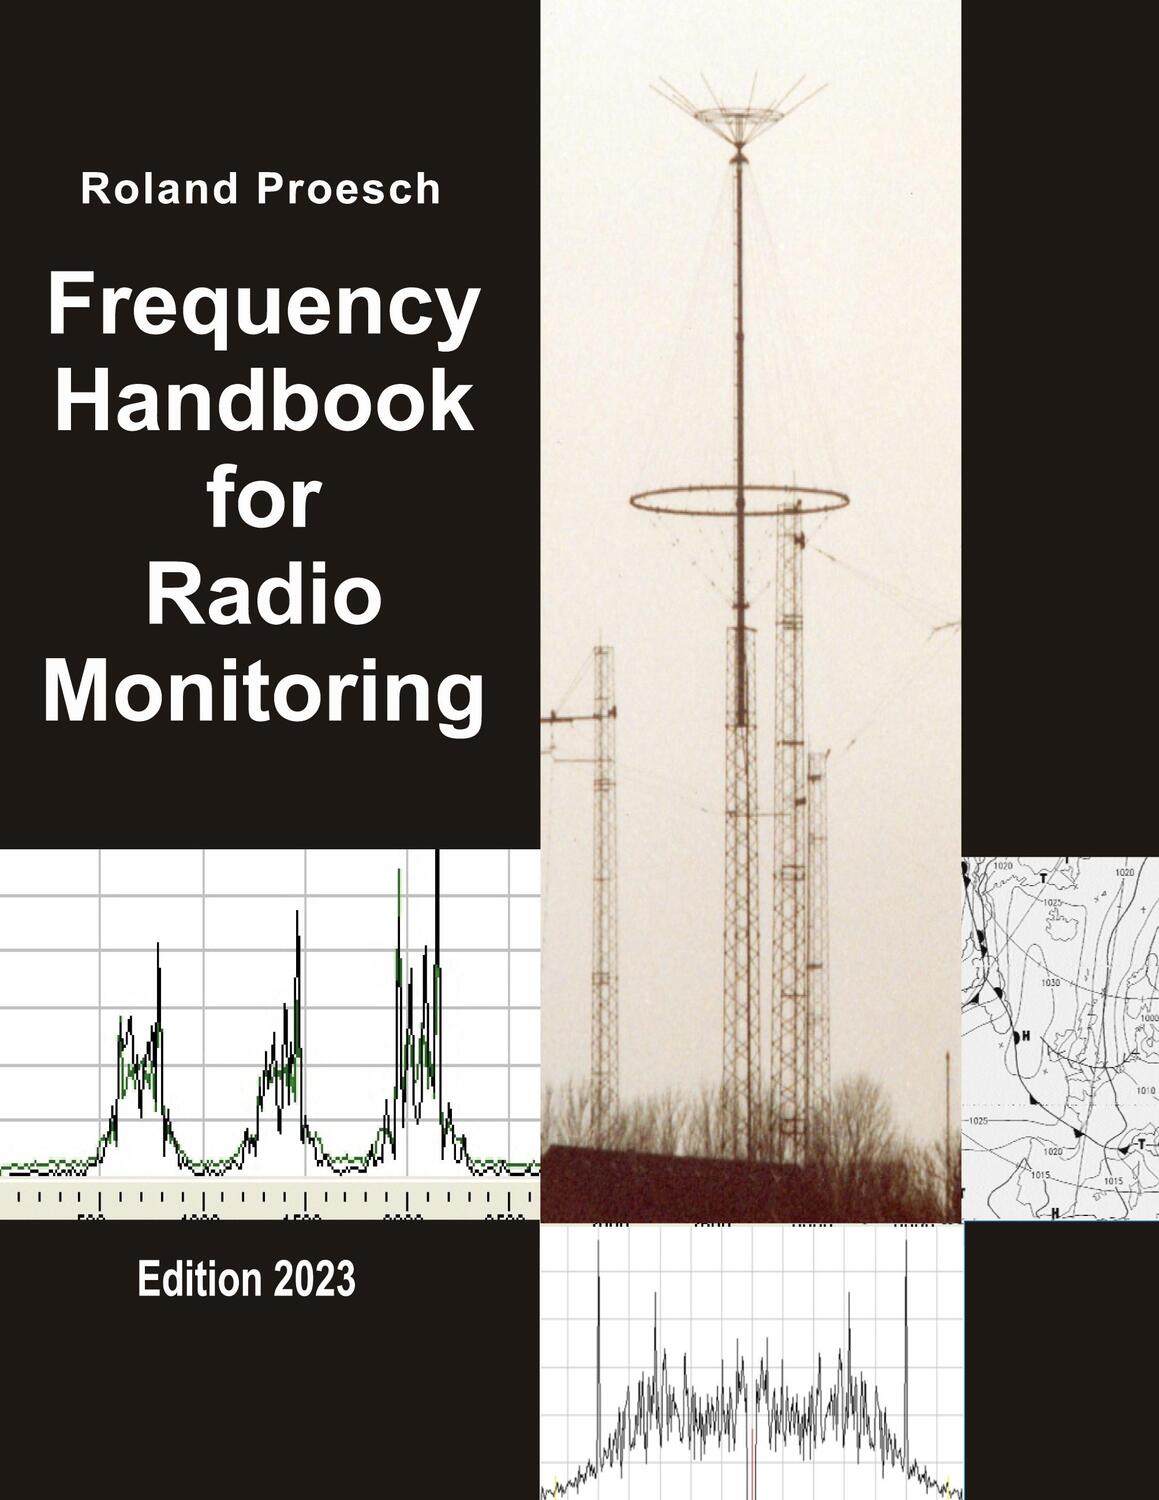 Cover: 9783757813352 | Frequency Handbook for Radio Monitoring | Edition 2023 | Proesch